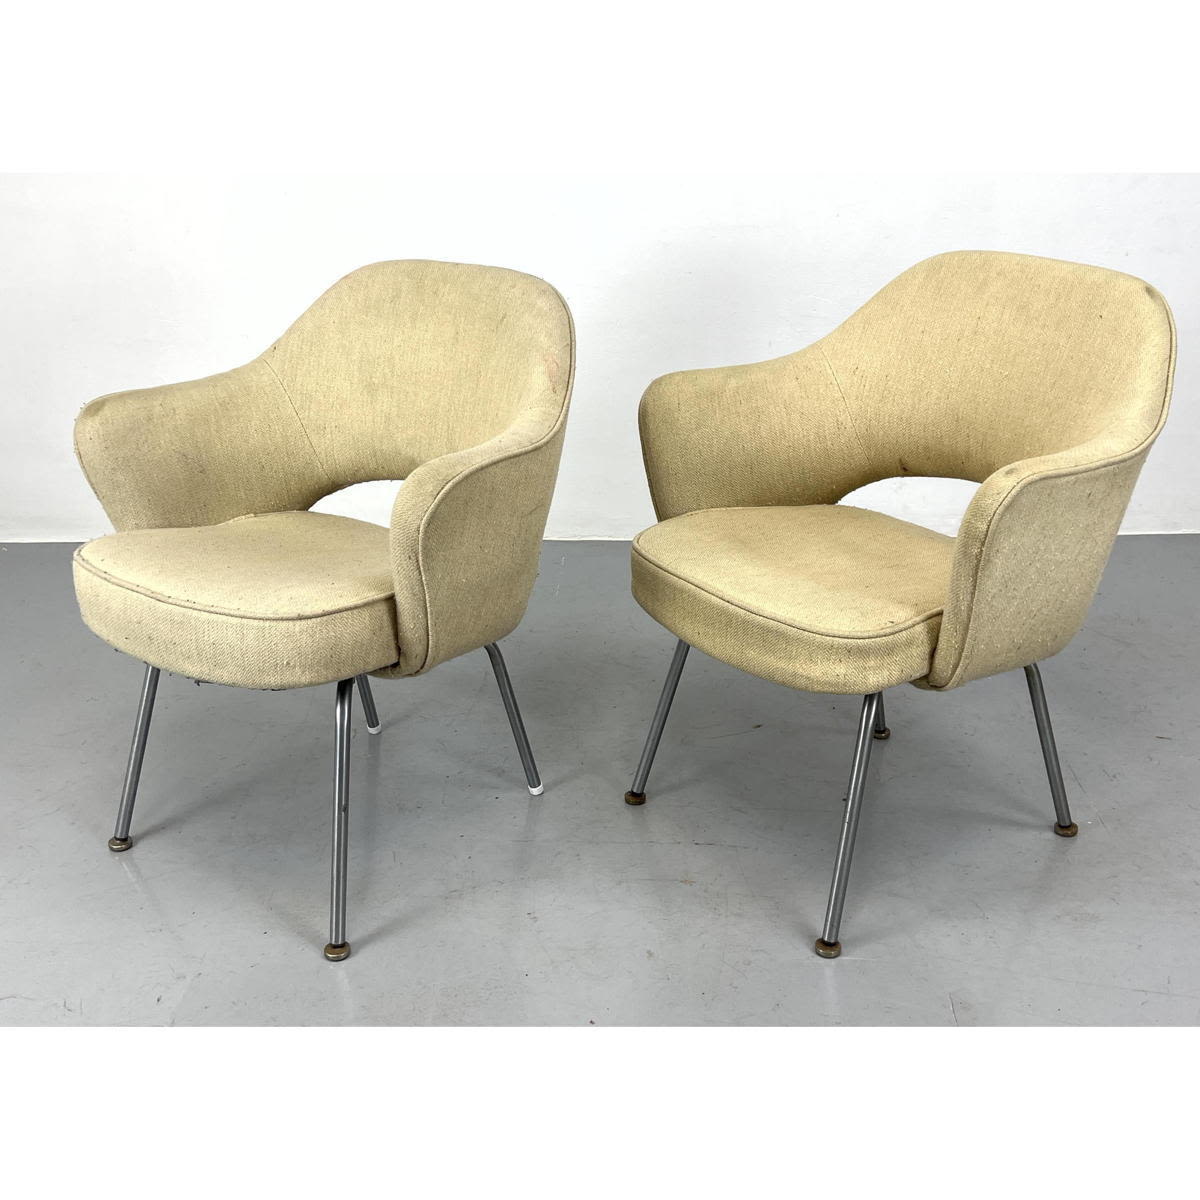 Pr Saarinen style Upholstered Dining 2a786a